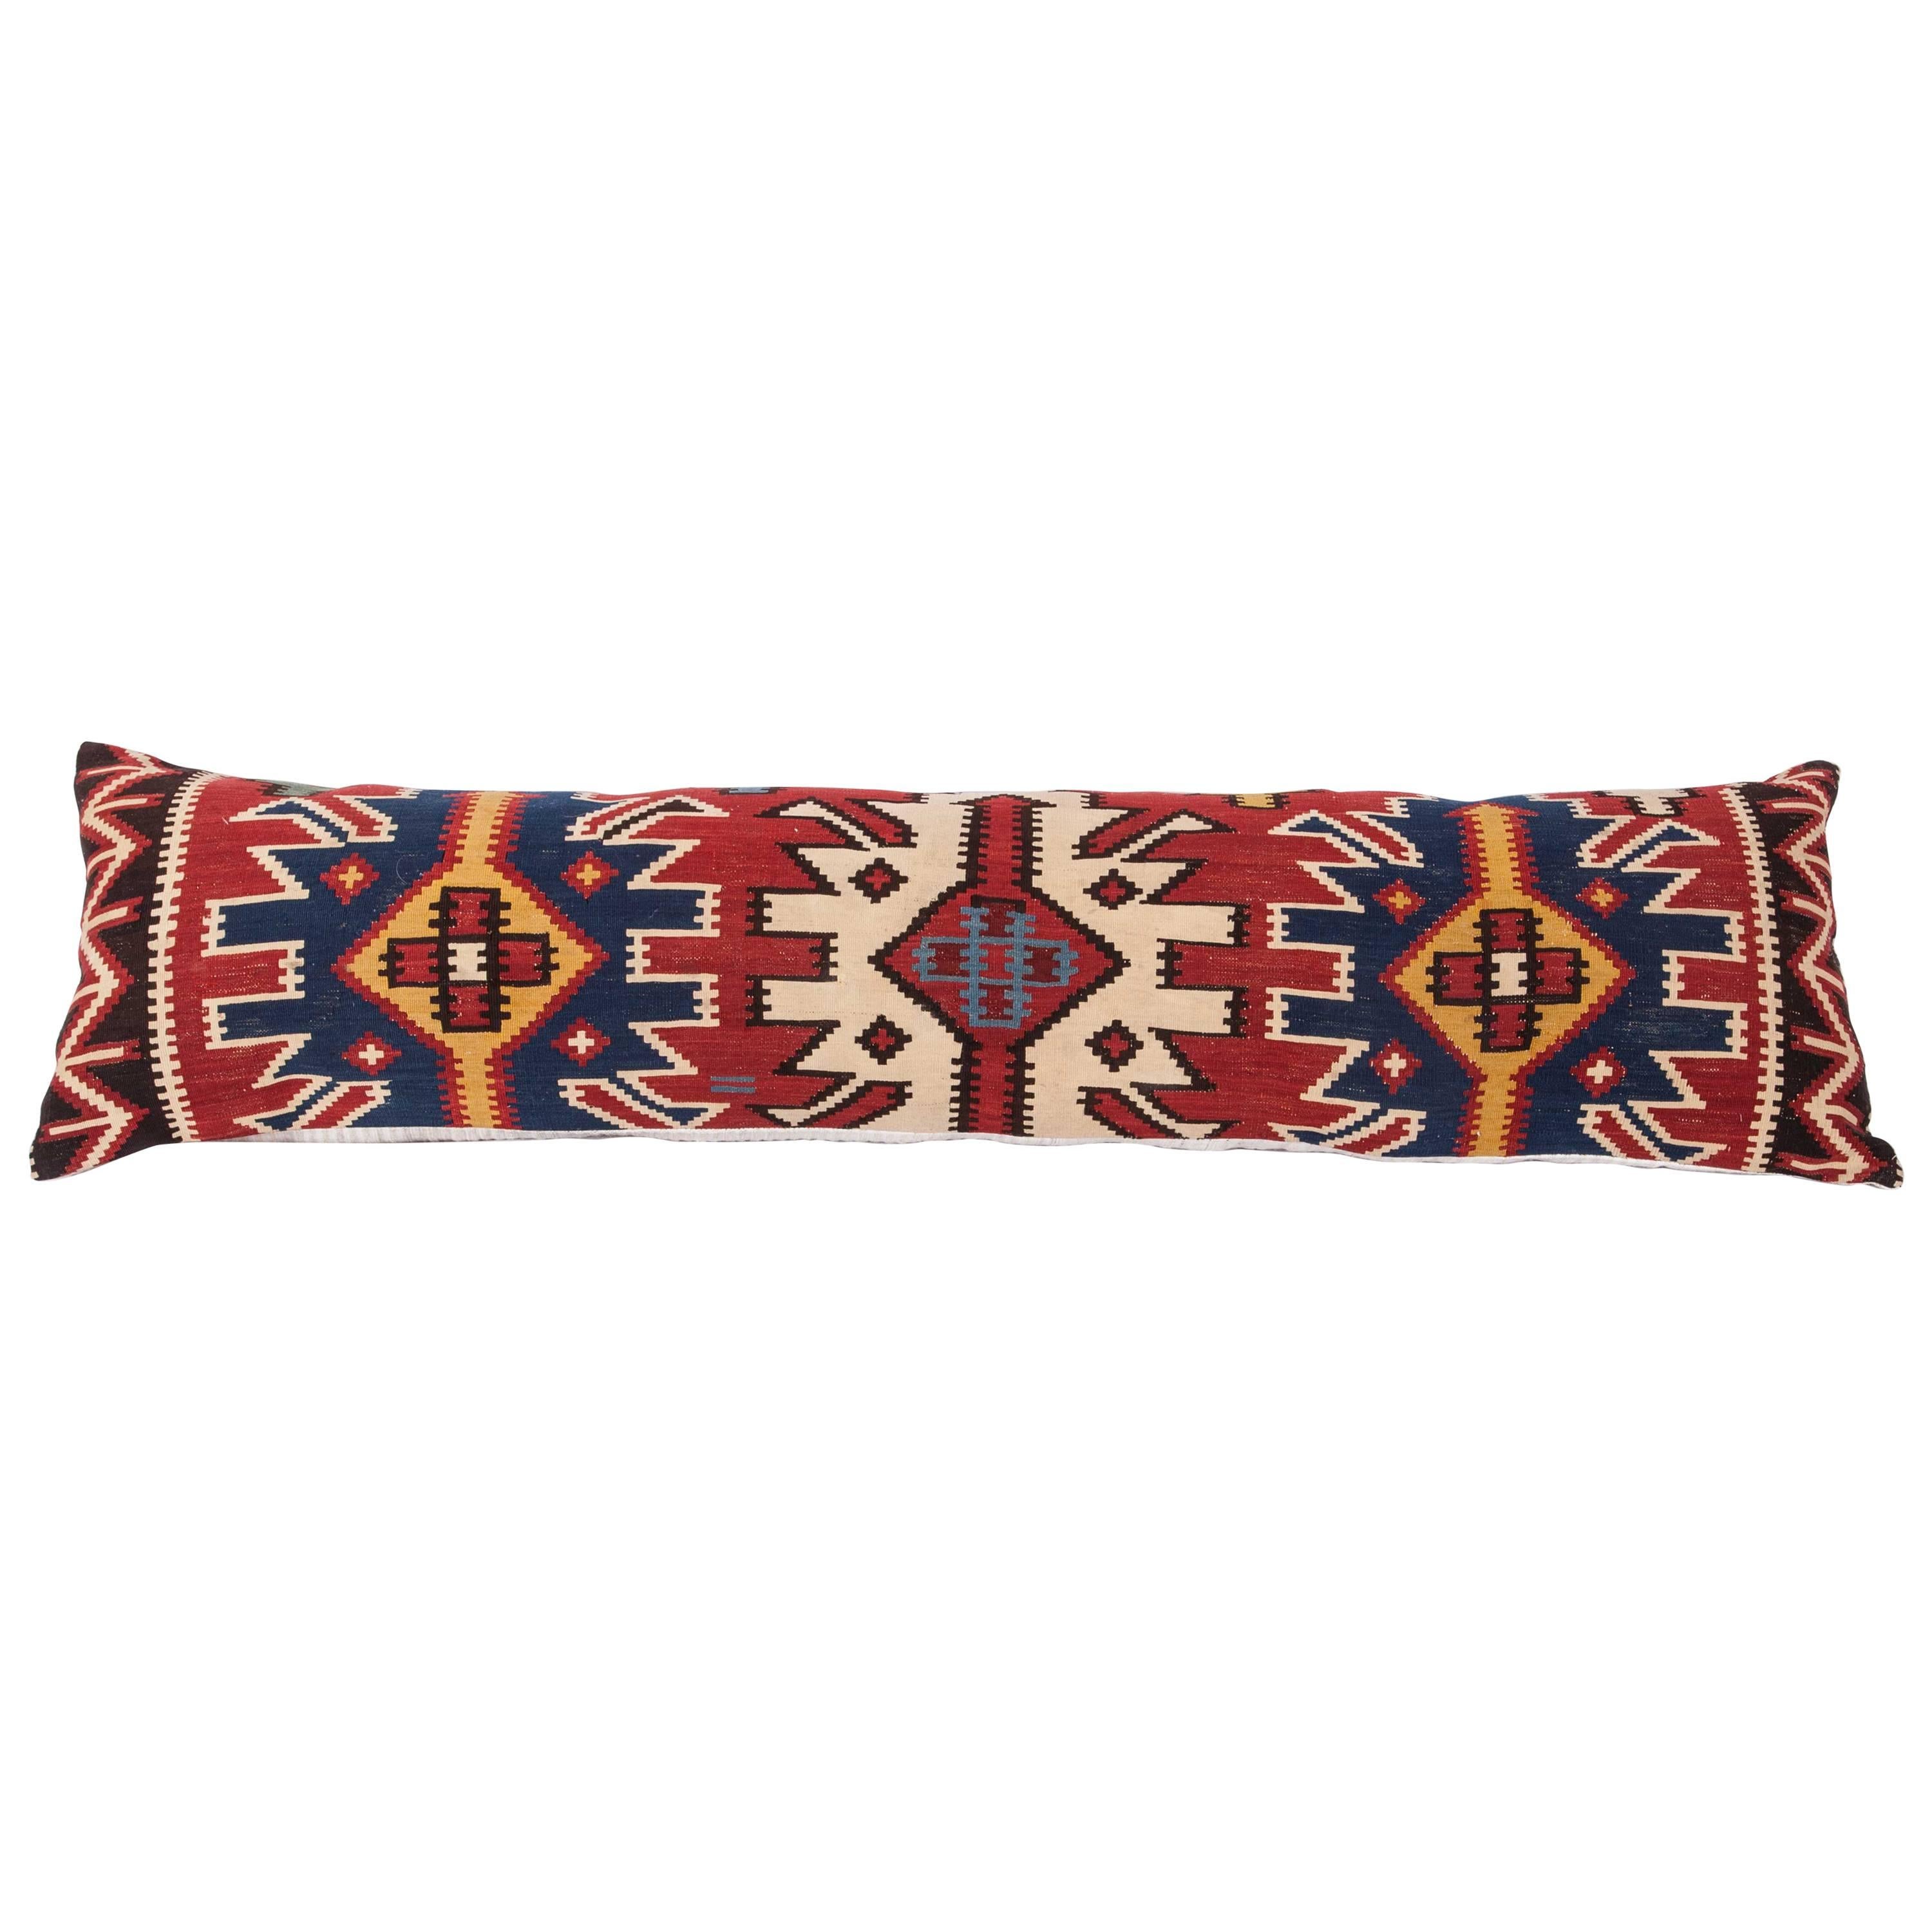 Antique Very Long Pillow Made Out of a 19th Century Caucasian Kilim